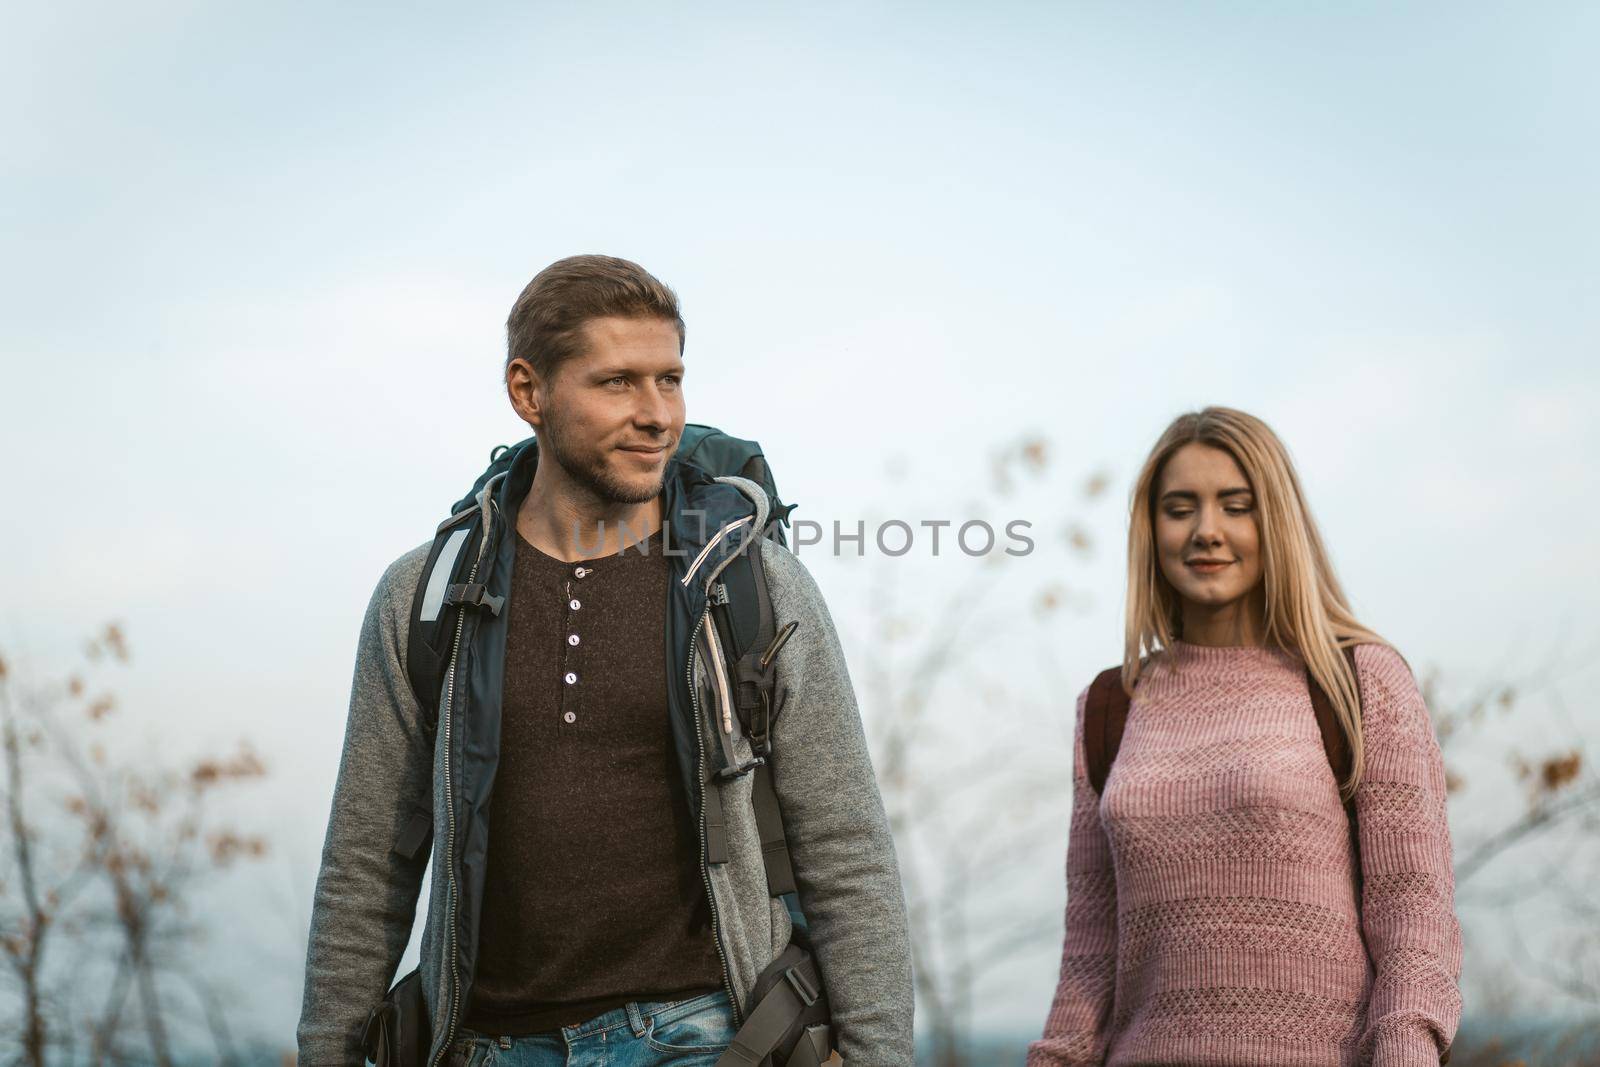 Young family leads a healthy lifestyle Walking in the fresh air, Couple of tourists are hiking on nature, focus on a smiling Caucasian man with a backpack in gray casual clothes